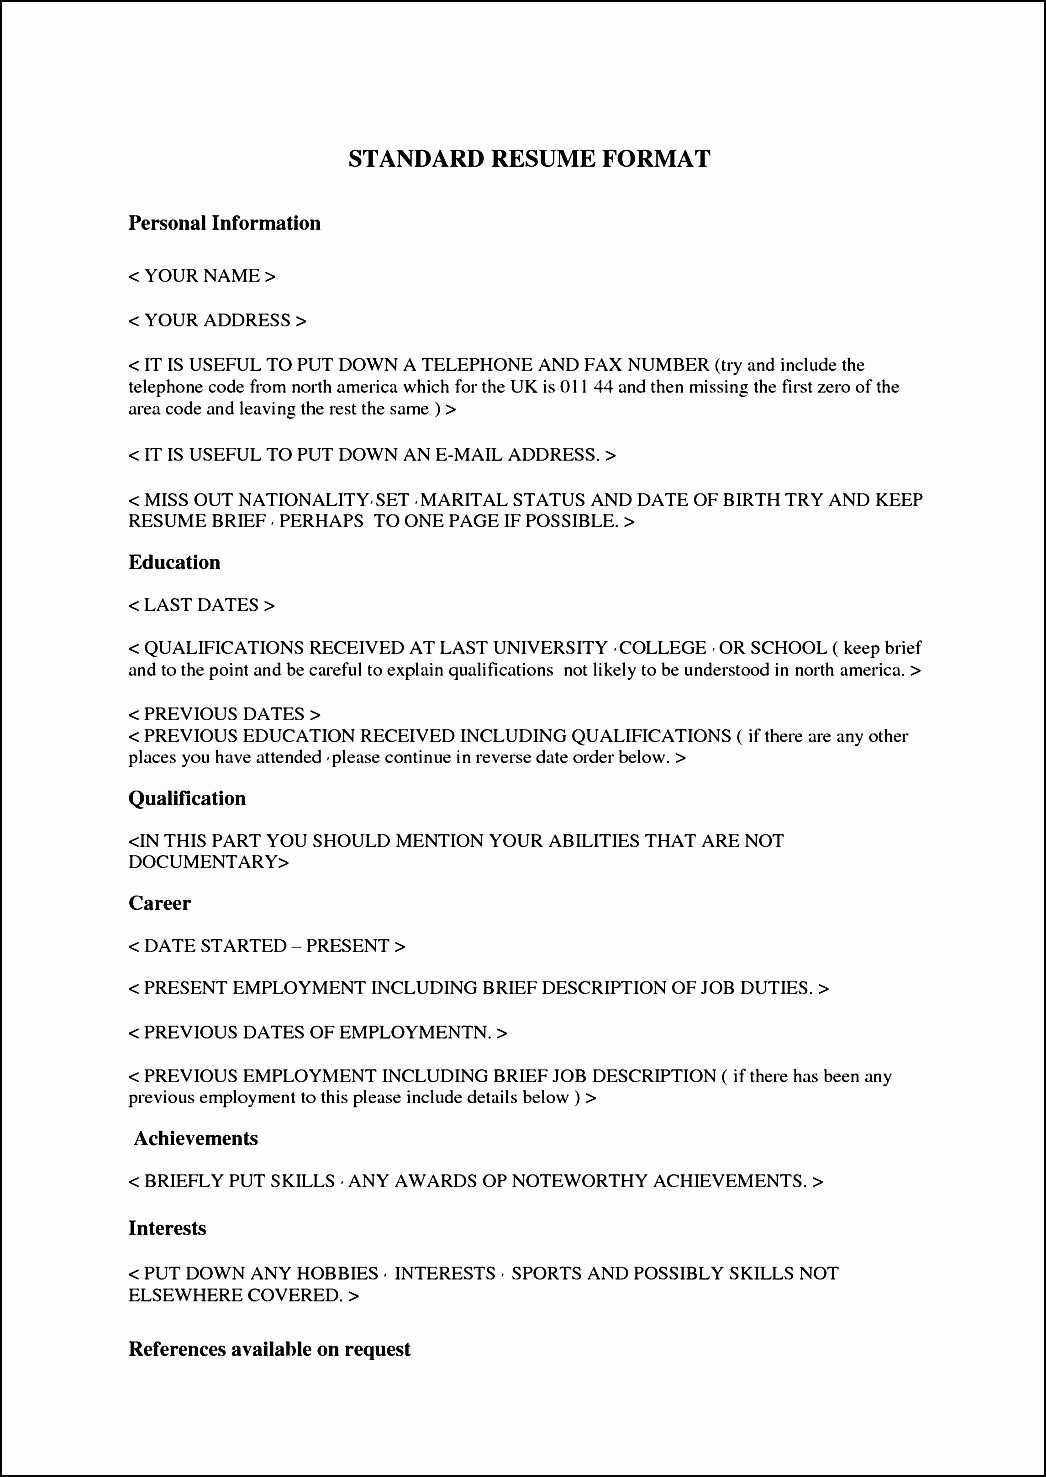 Sample Of Curriculum Vitae format Awesome Standard Curriculum Vitae format Free Samples Examples